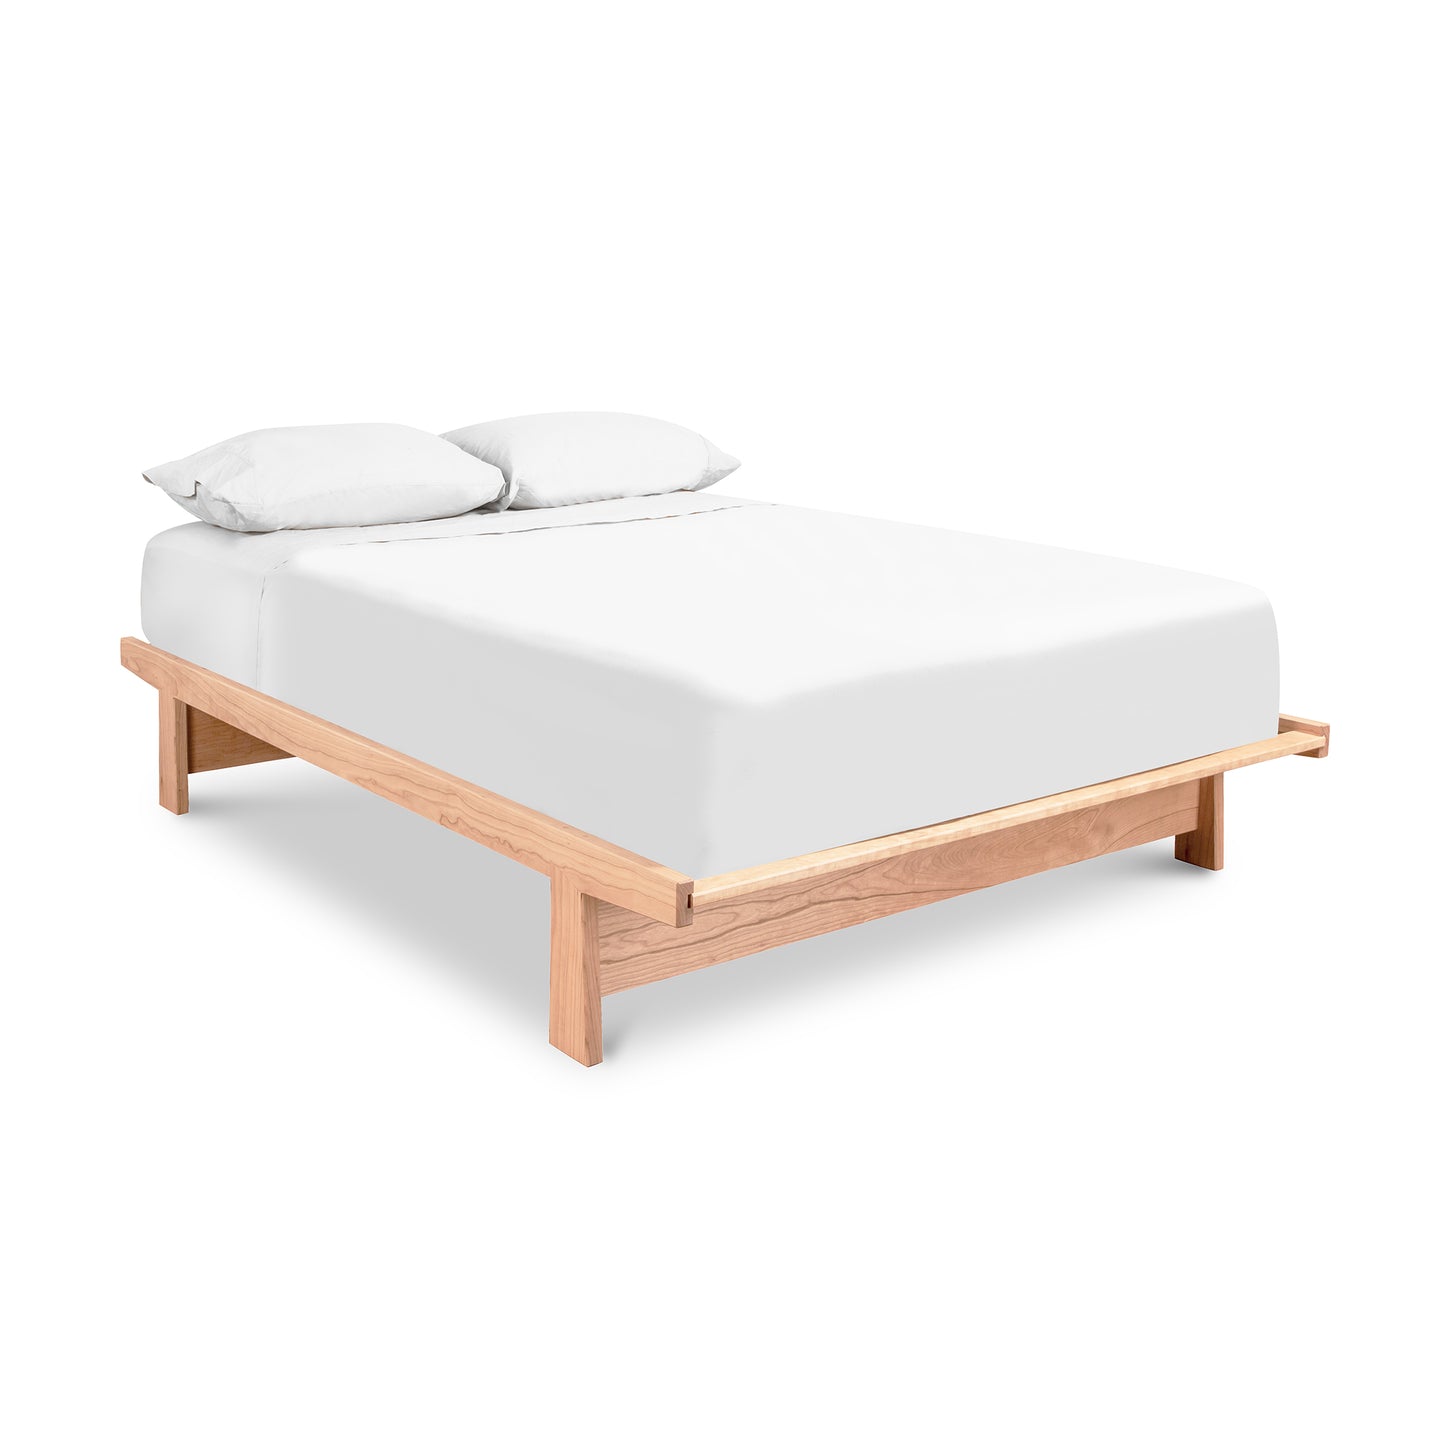 Cherry Moon Dovetail Platform Bed by Maple Corner Woodworks - Eco-Friendly, Solid Cherry Wood with Oil Finish, Sustainably Harvested Timber. White Bedding and Pillows on Minimalist Design against a White Background.